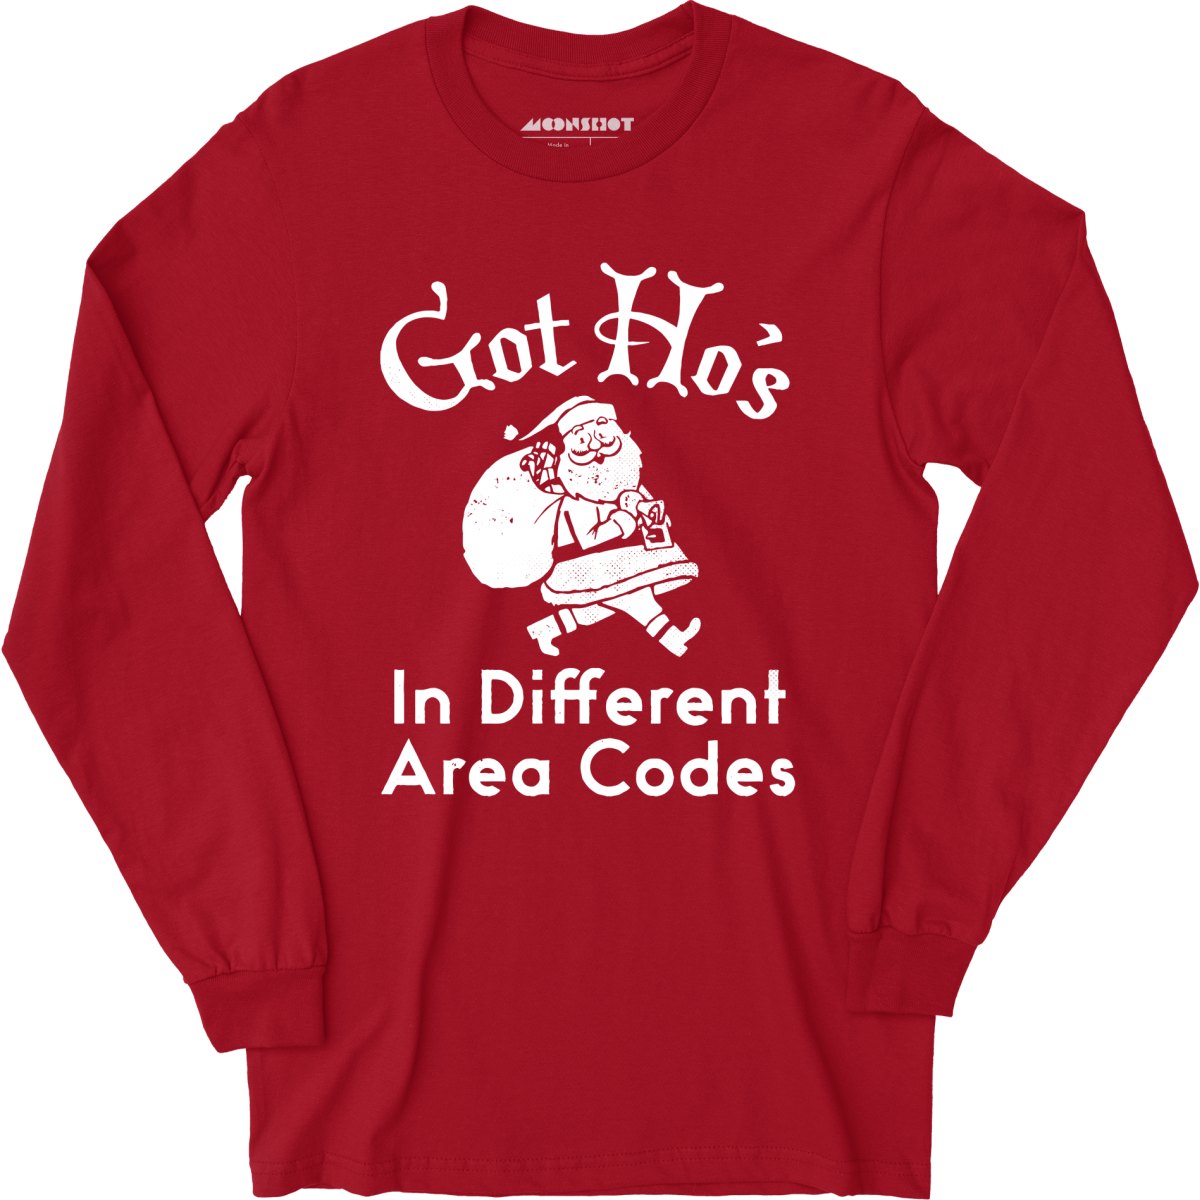 Got Ho's in Different Area Codes - Long Sleeve T-Shirt